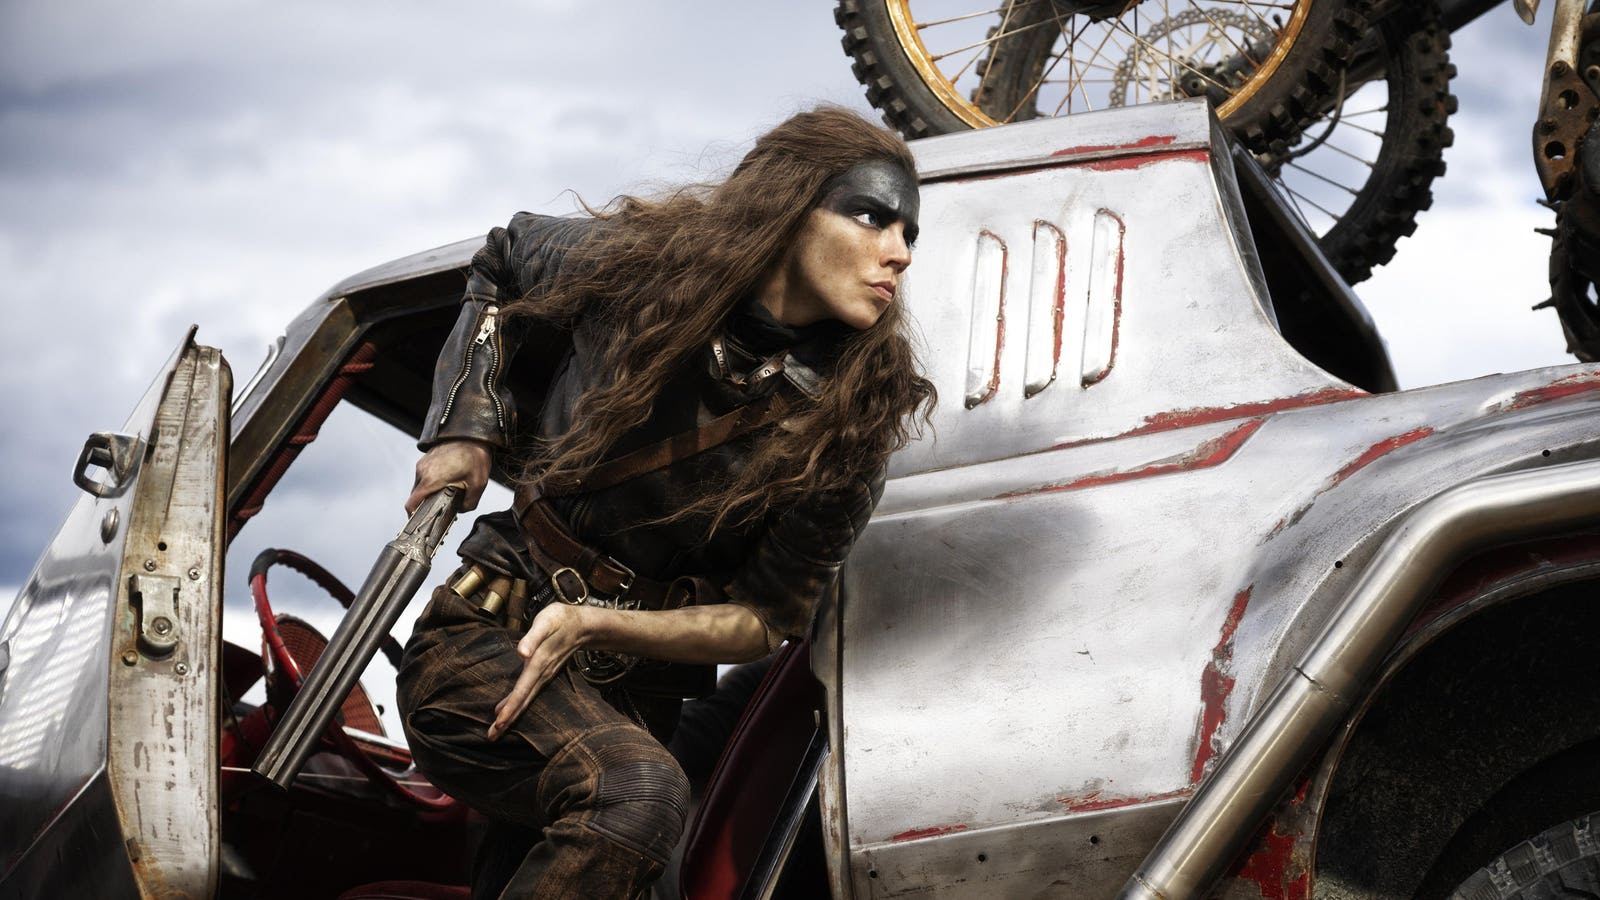 ‘Furiosa’ Edges ‘Garfield’ With $32 Million At Memorial Day Weekend Box Office